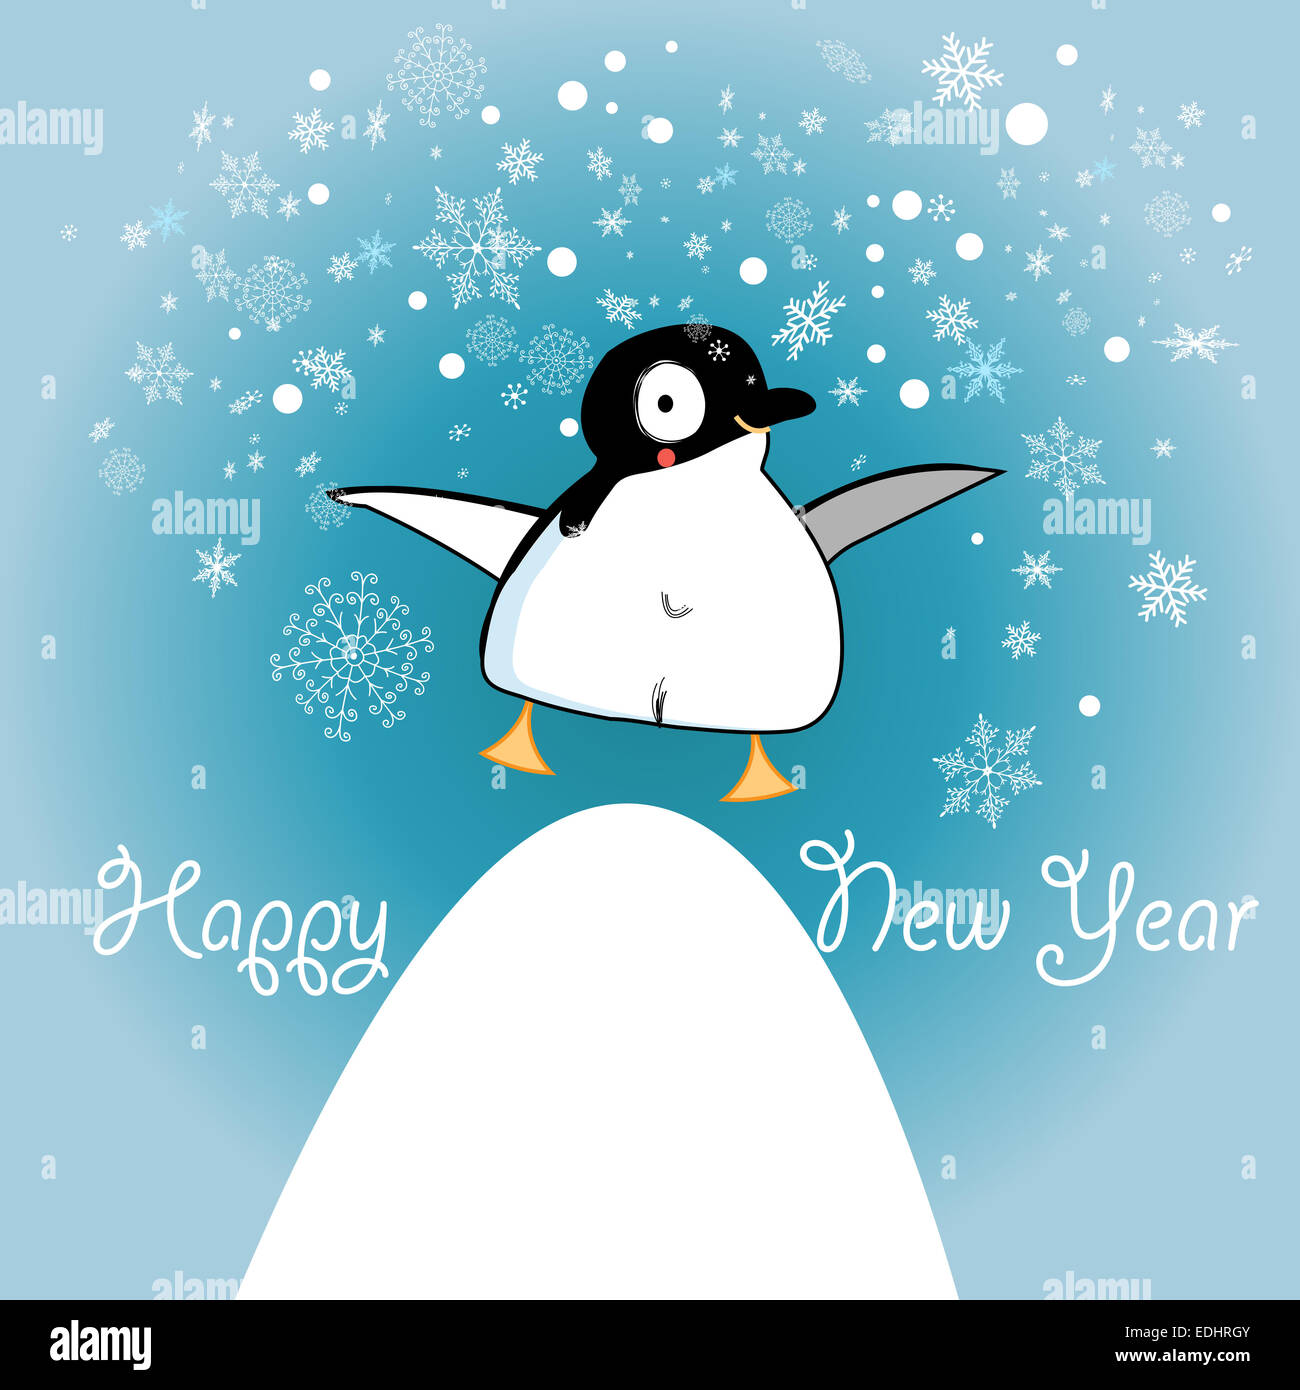 Bright Christmas card with a penguin on a blue background with snowflakes Stock Photo